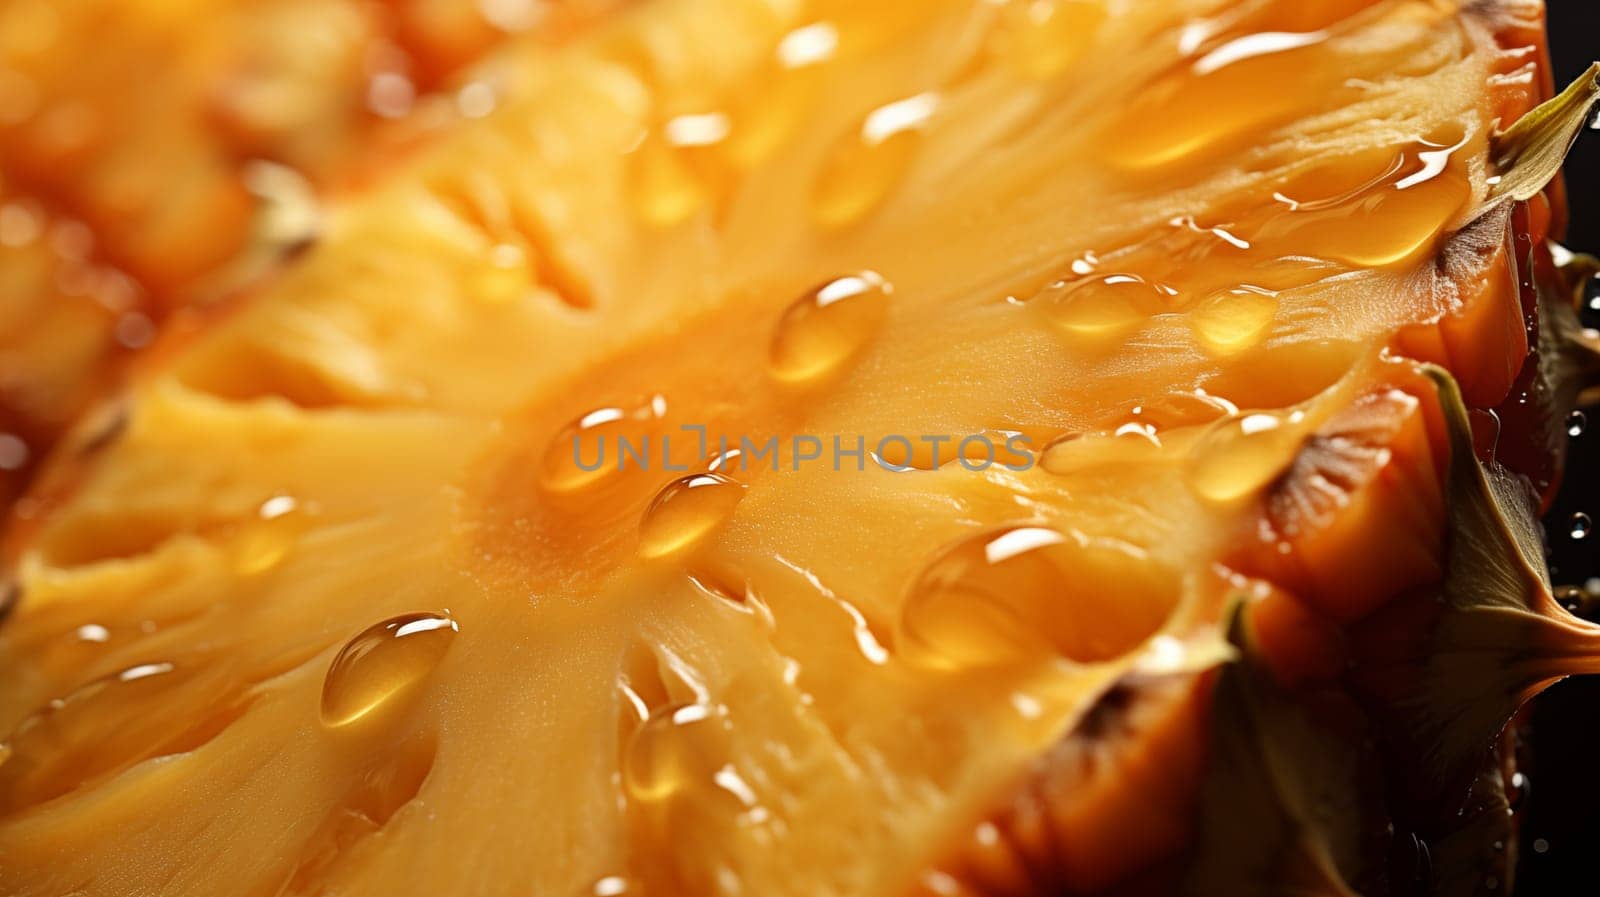 Close-up of a cut of a fresh pineapple fruit with drops of juice by Zakharova